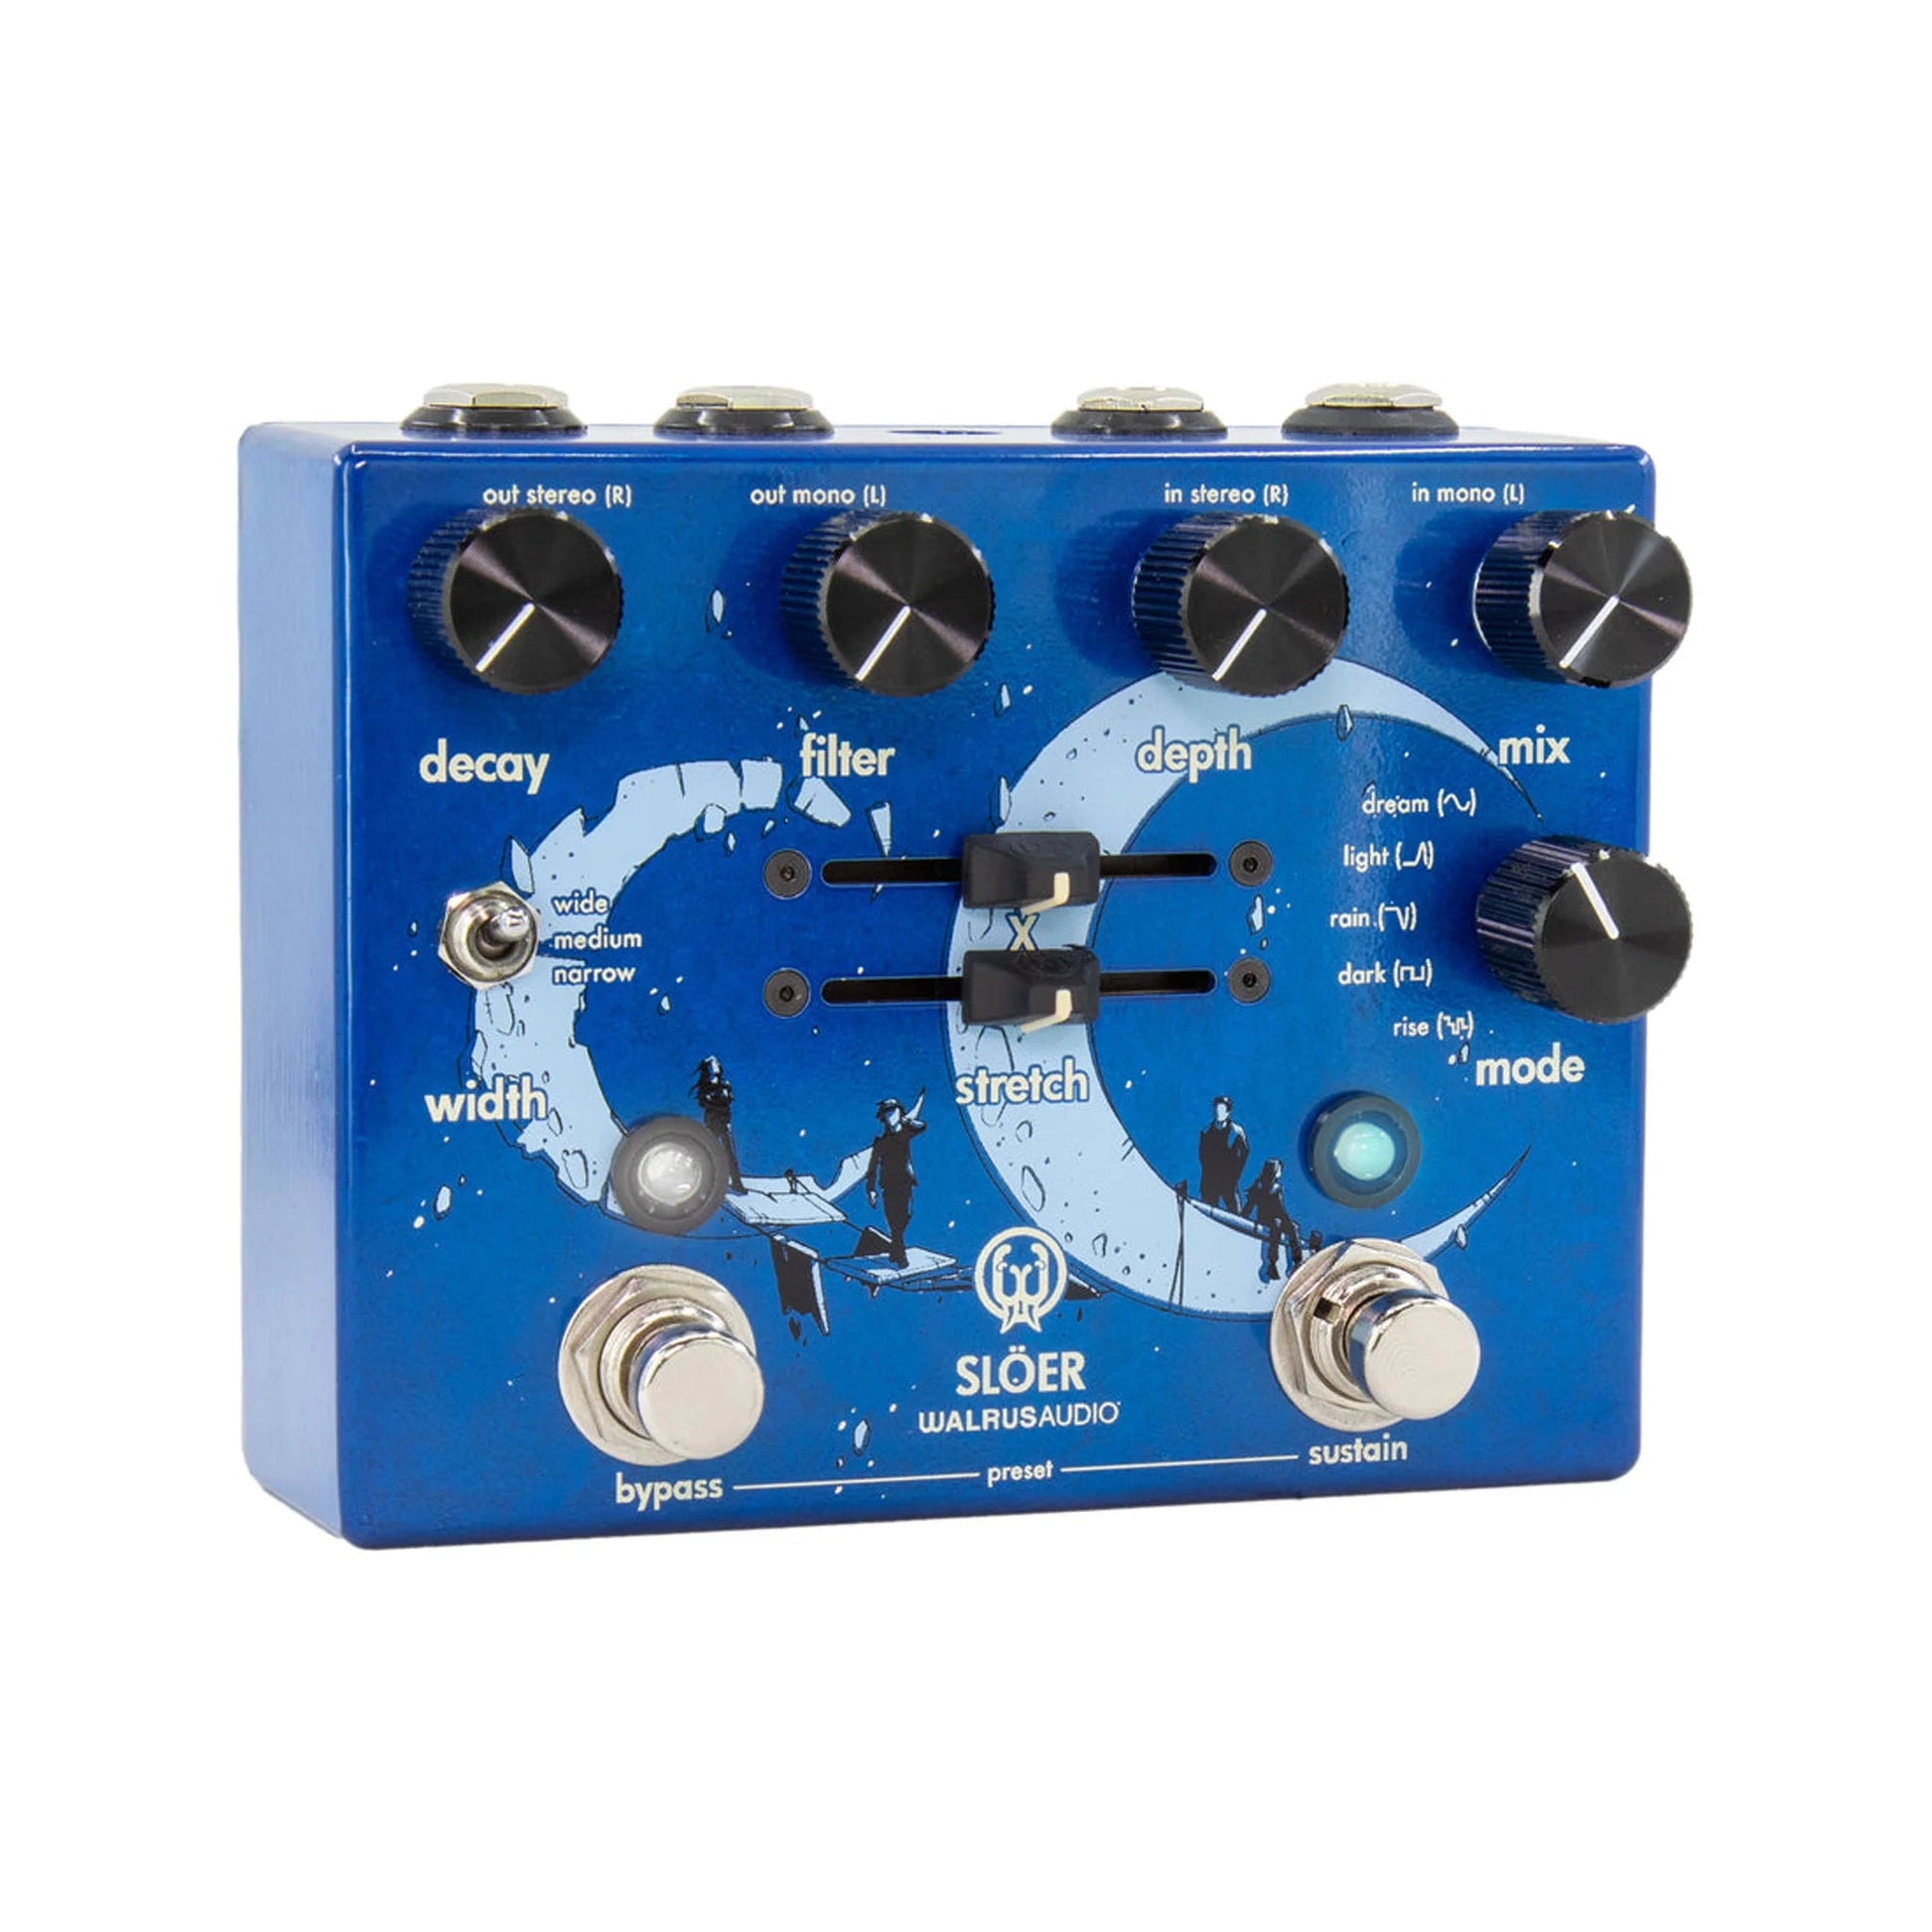 Pedal Guitar Walrus Audio SLOER Stereo Ambient Reverb - Việt Music